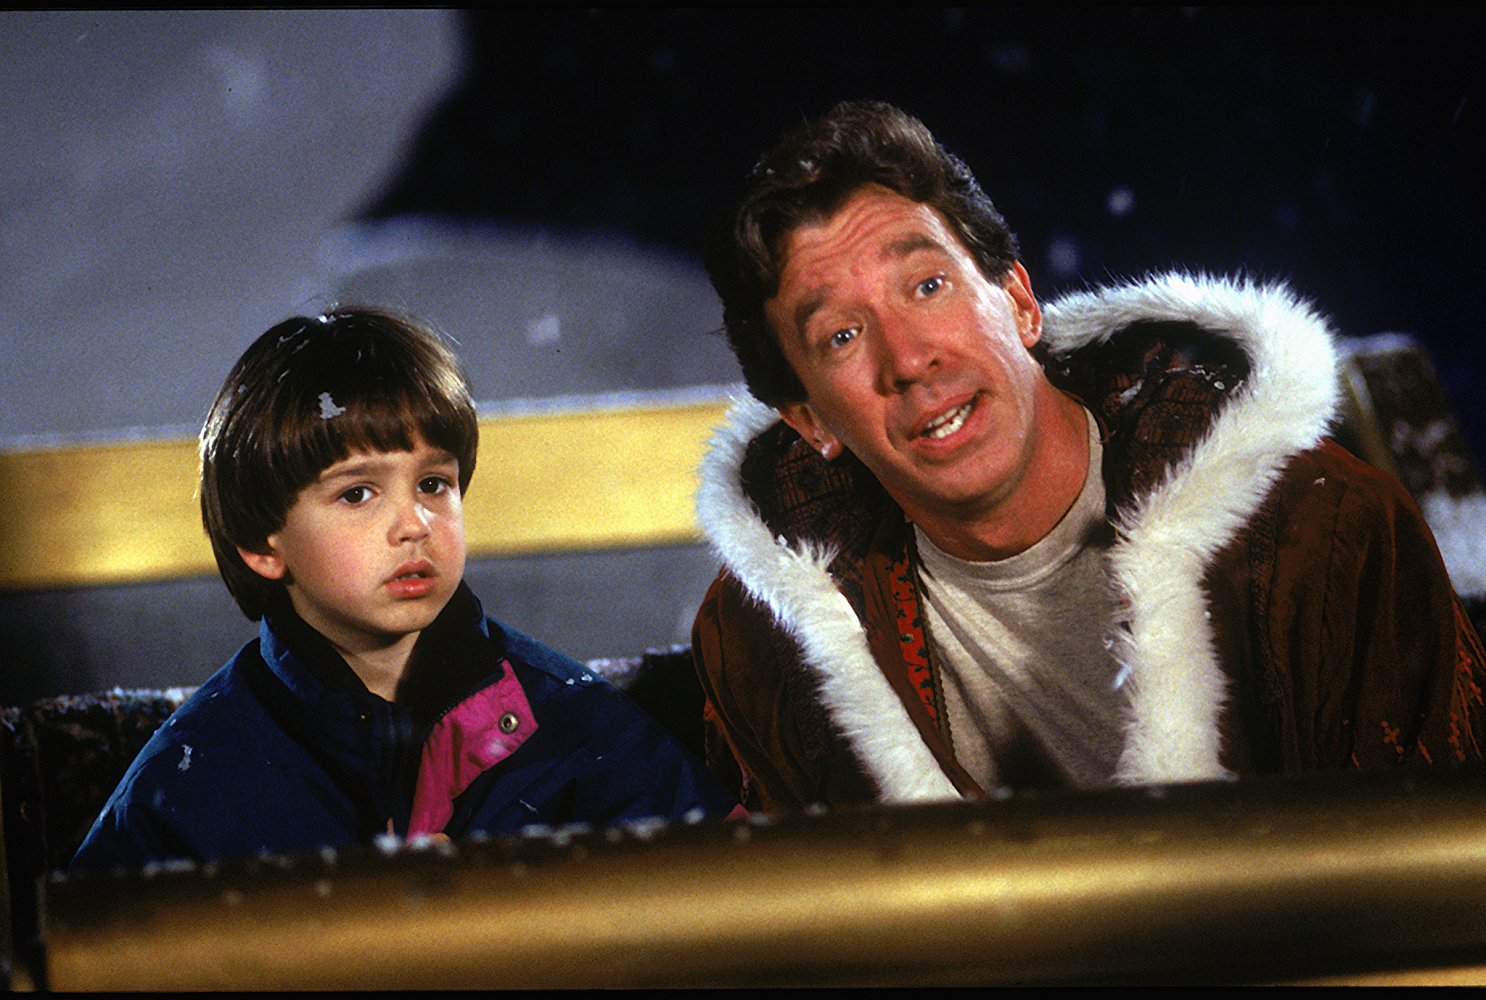 PHOTO: The Disney movie, The Santa Clause, starring Tim Allen and Eric Lloyd, 1994. 